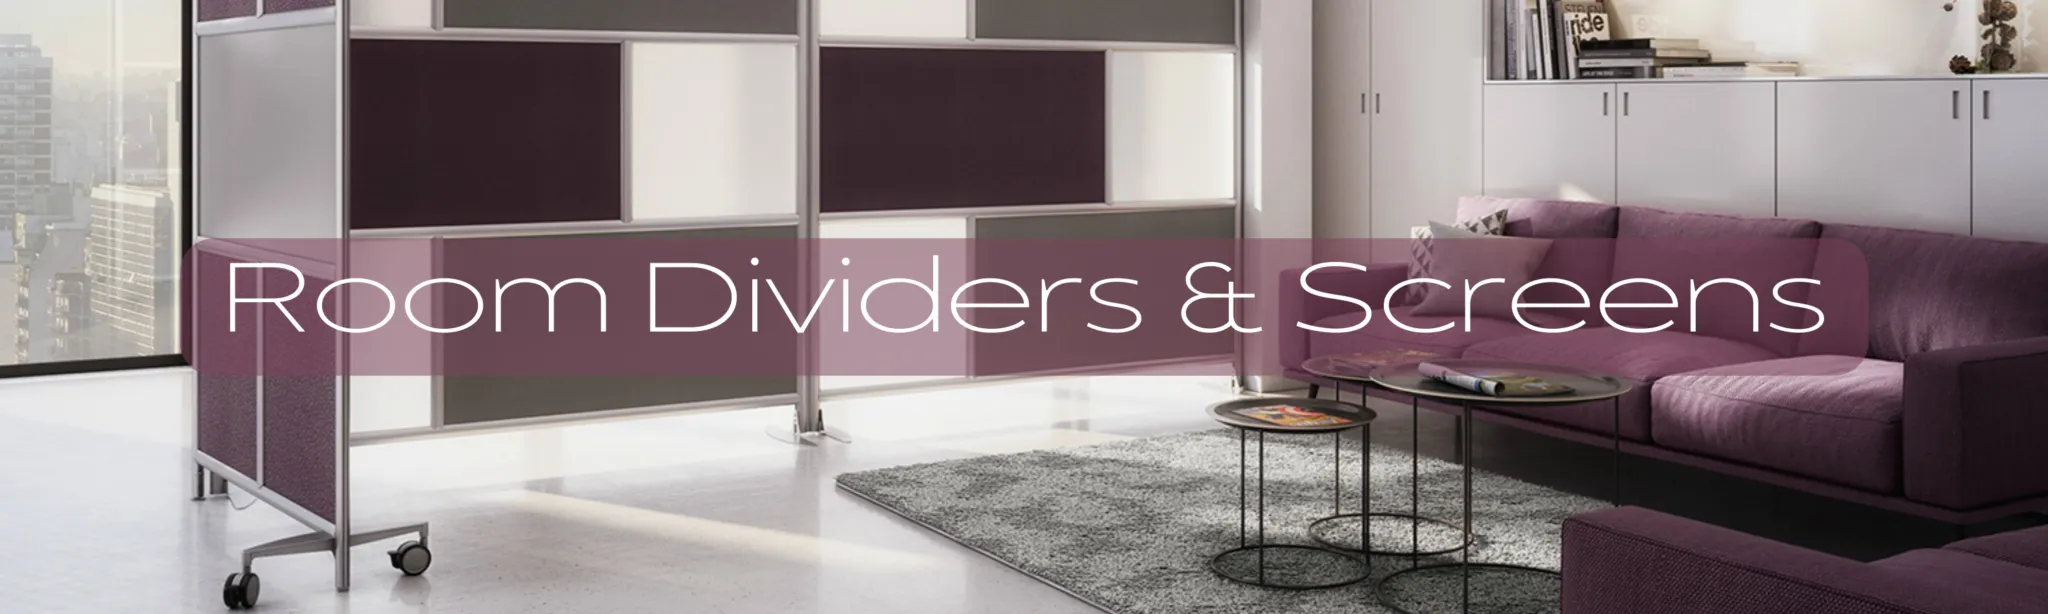 Room-dividers-Screens-Banner-2048x614